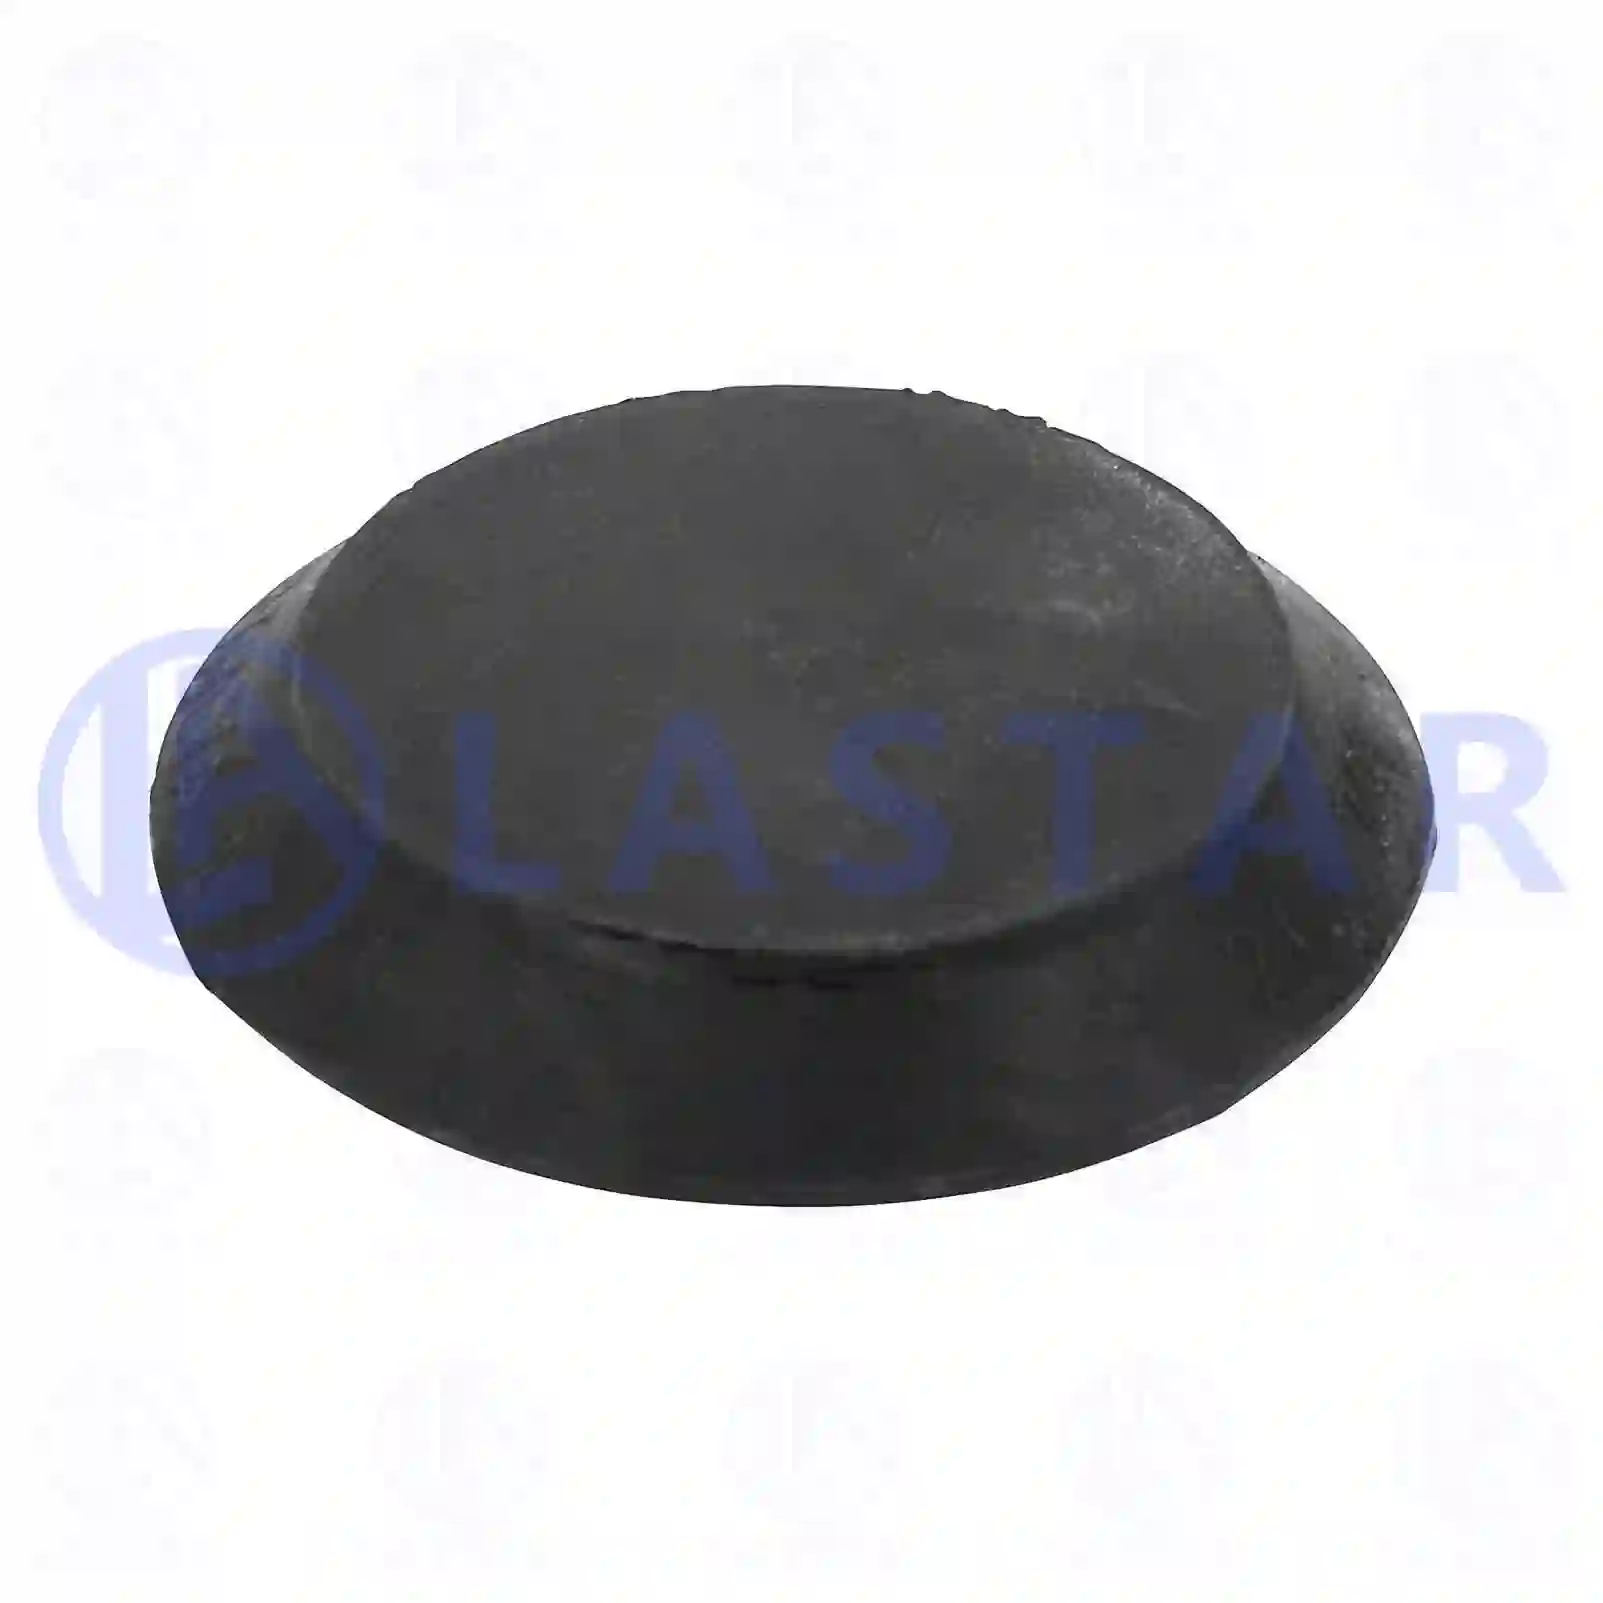 Buffer stop, 77728469, 0361477, 361477, ZG40876-0008, , ||  77728469 Lastar Spare Part | Truck Spare Parts, Auotomotive Spare Parts Buffer stop, 77728469, 0361477, 361477, ZG40876-0008, , ||  77728469 Lastar Spare Part | Truck Spare Parts, Auotomotive Spare Parts